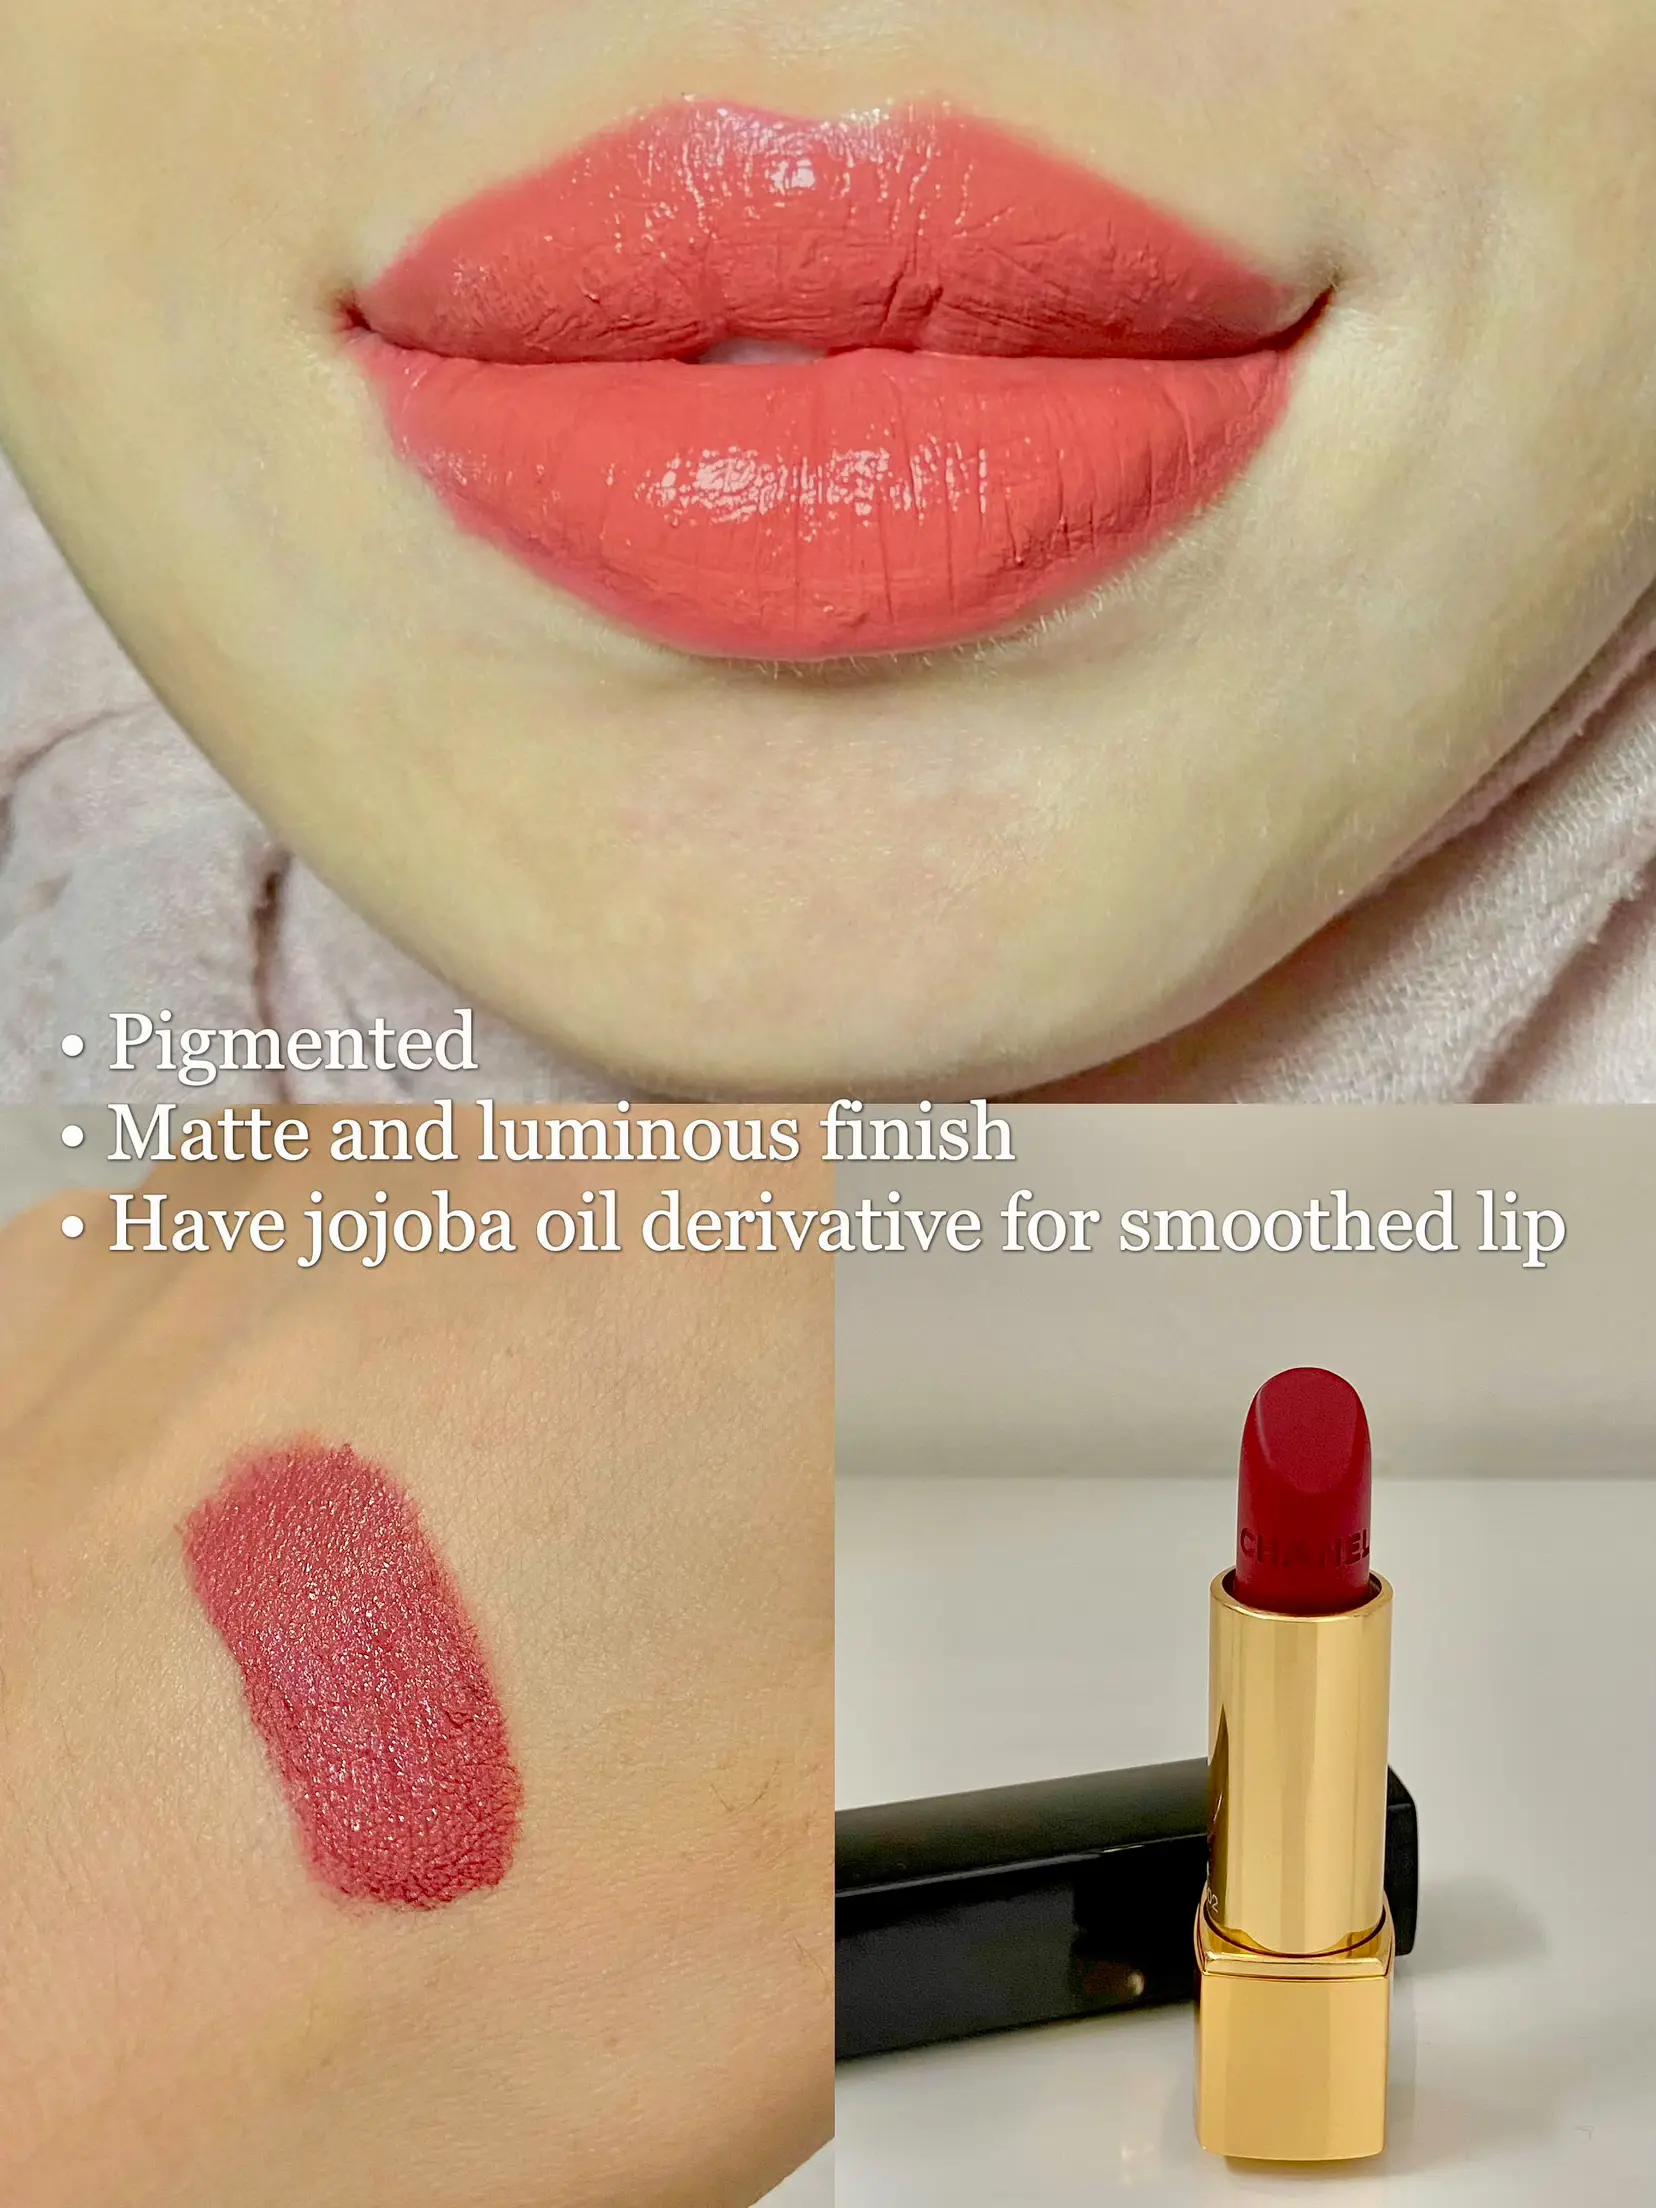 NEW CHANEL LIPSTICK RECOMMENDATION, Gallery posted by aliahjennie